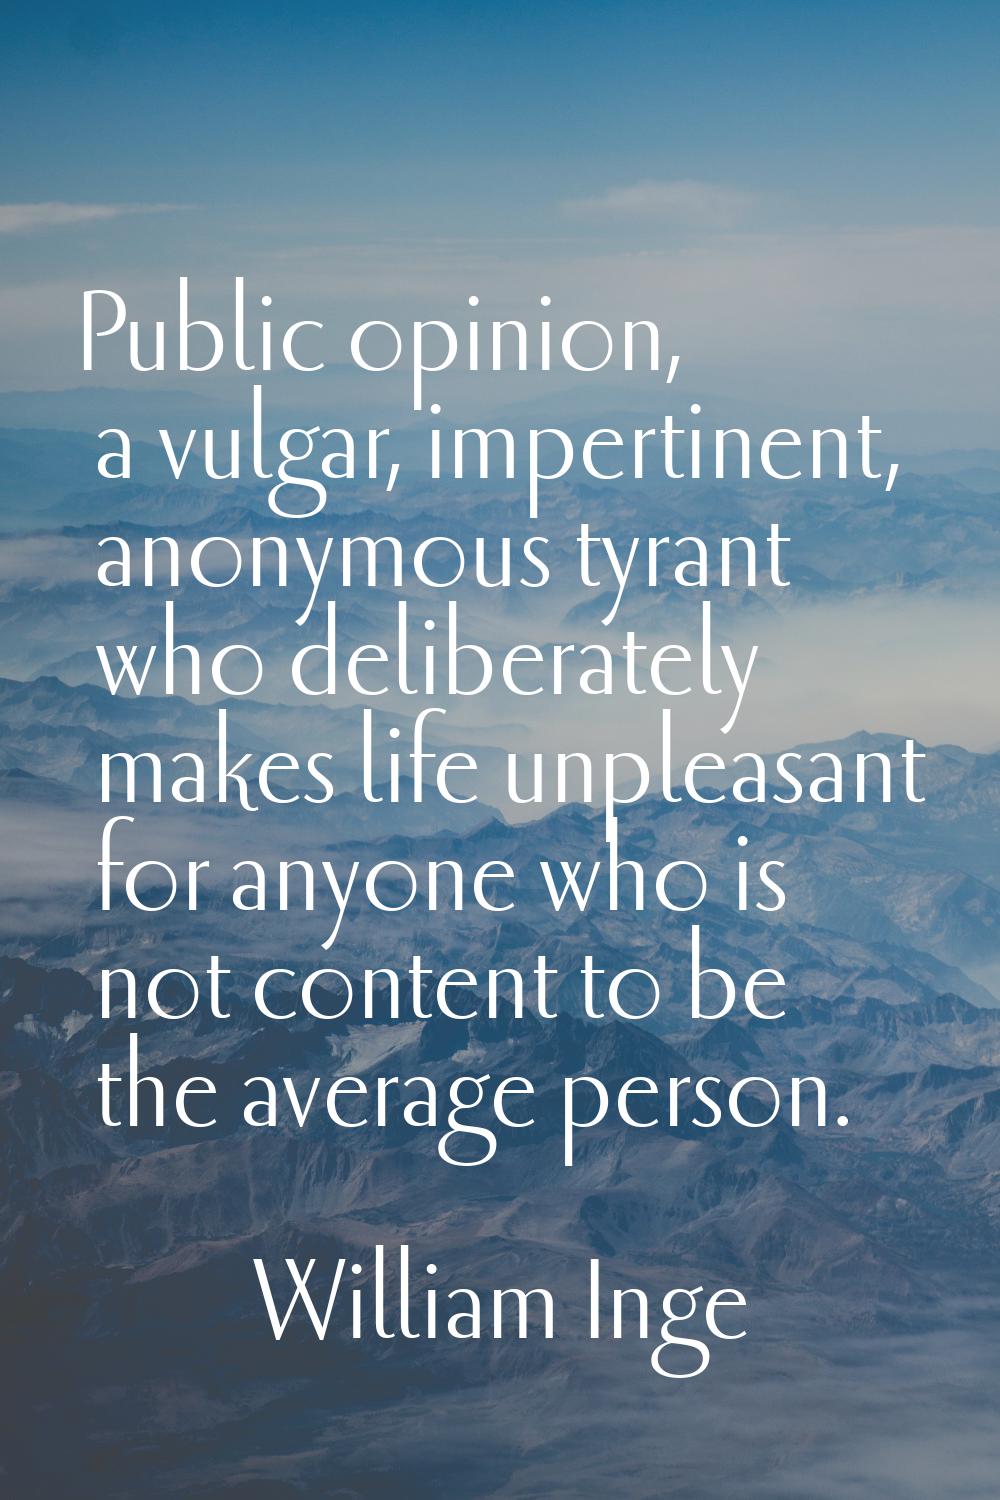 Public opinion, a vulgar, impertinent, anonymous tyrant who deliberately makes life unpleasant for 